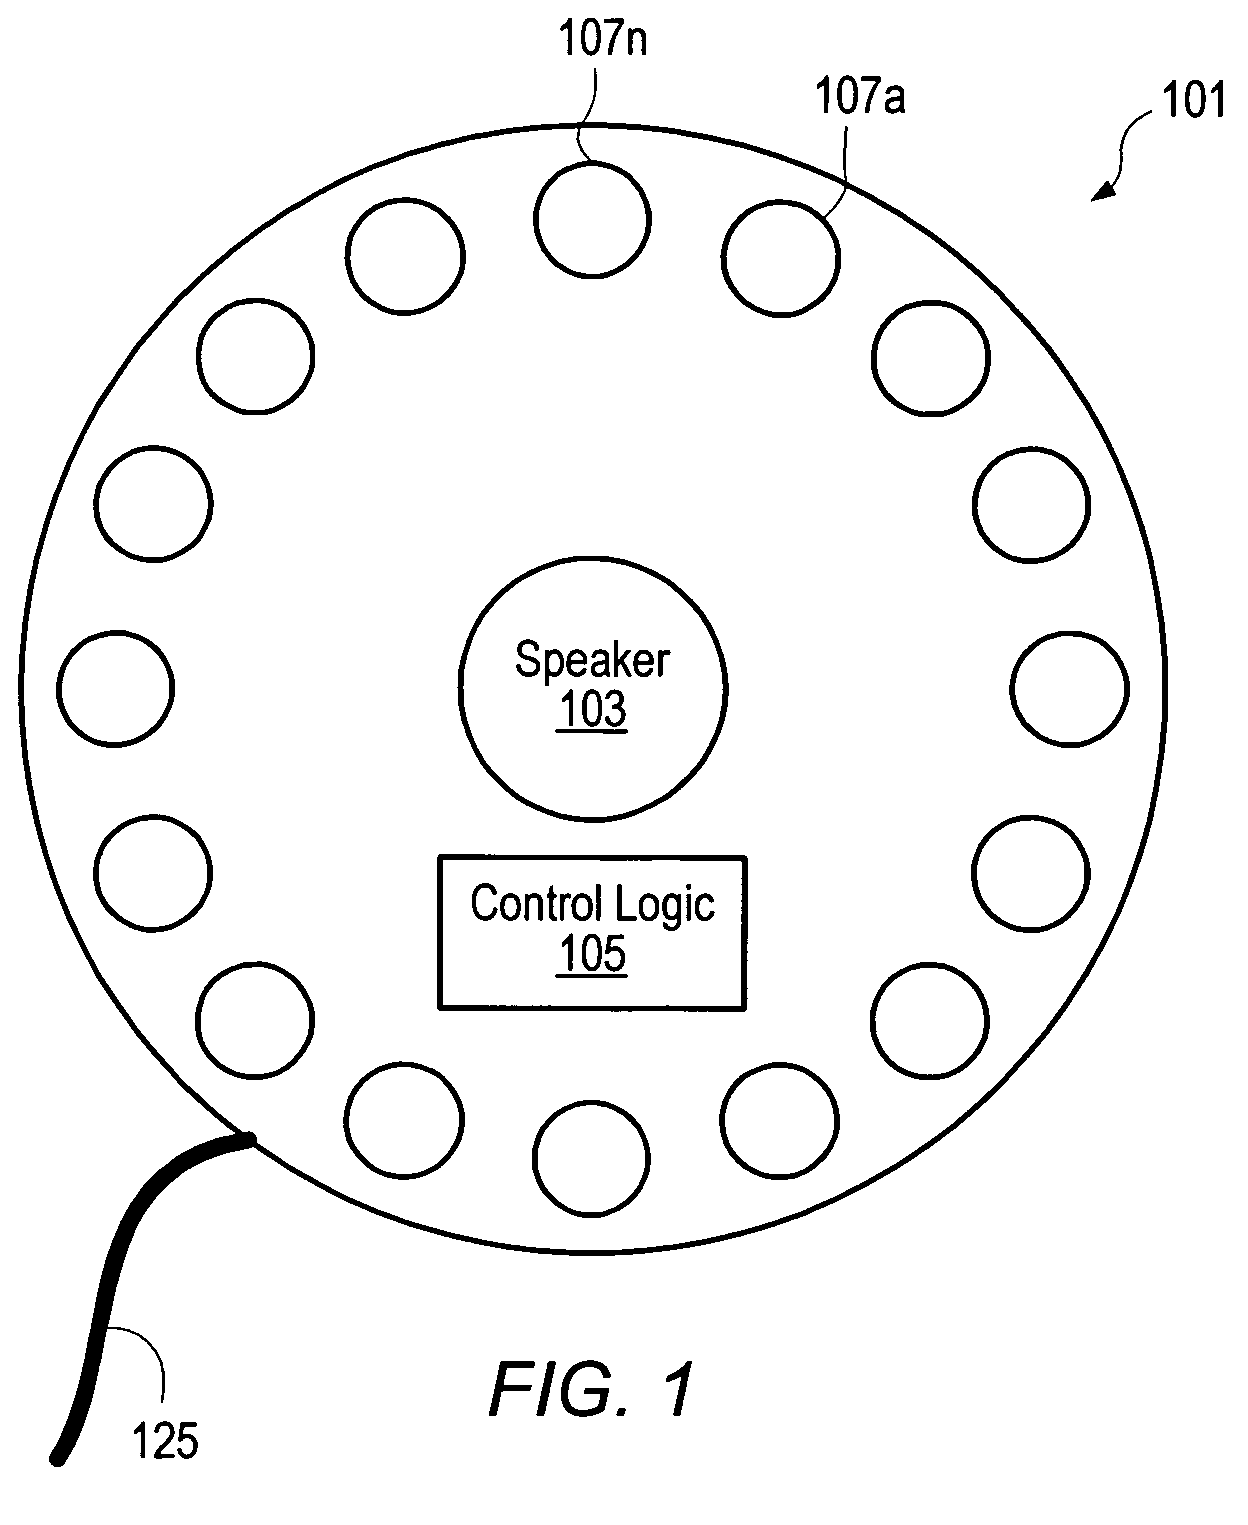 Speakerphone supporting video and audio features